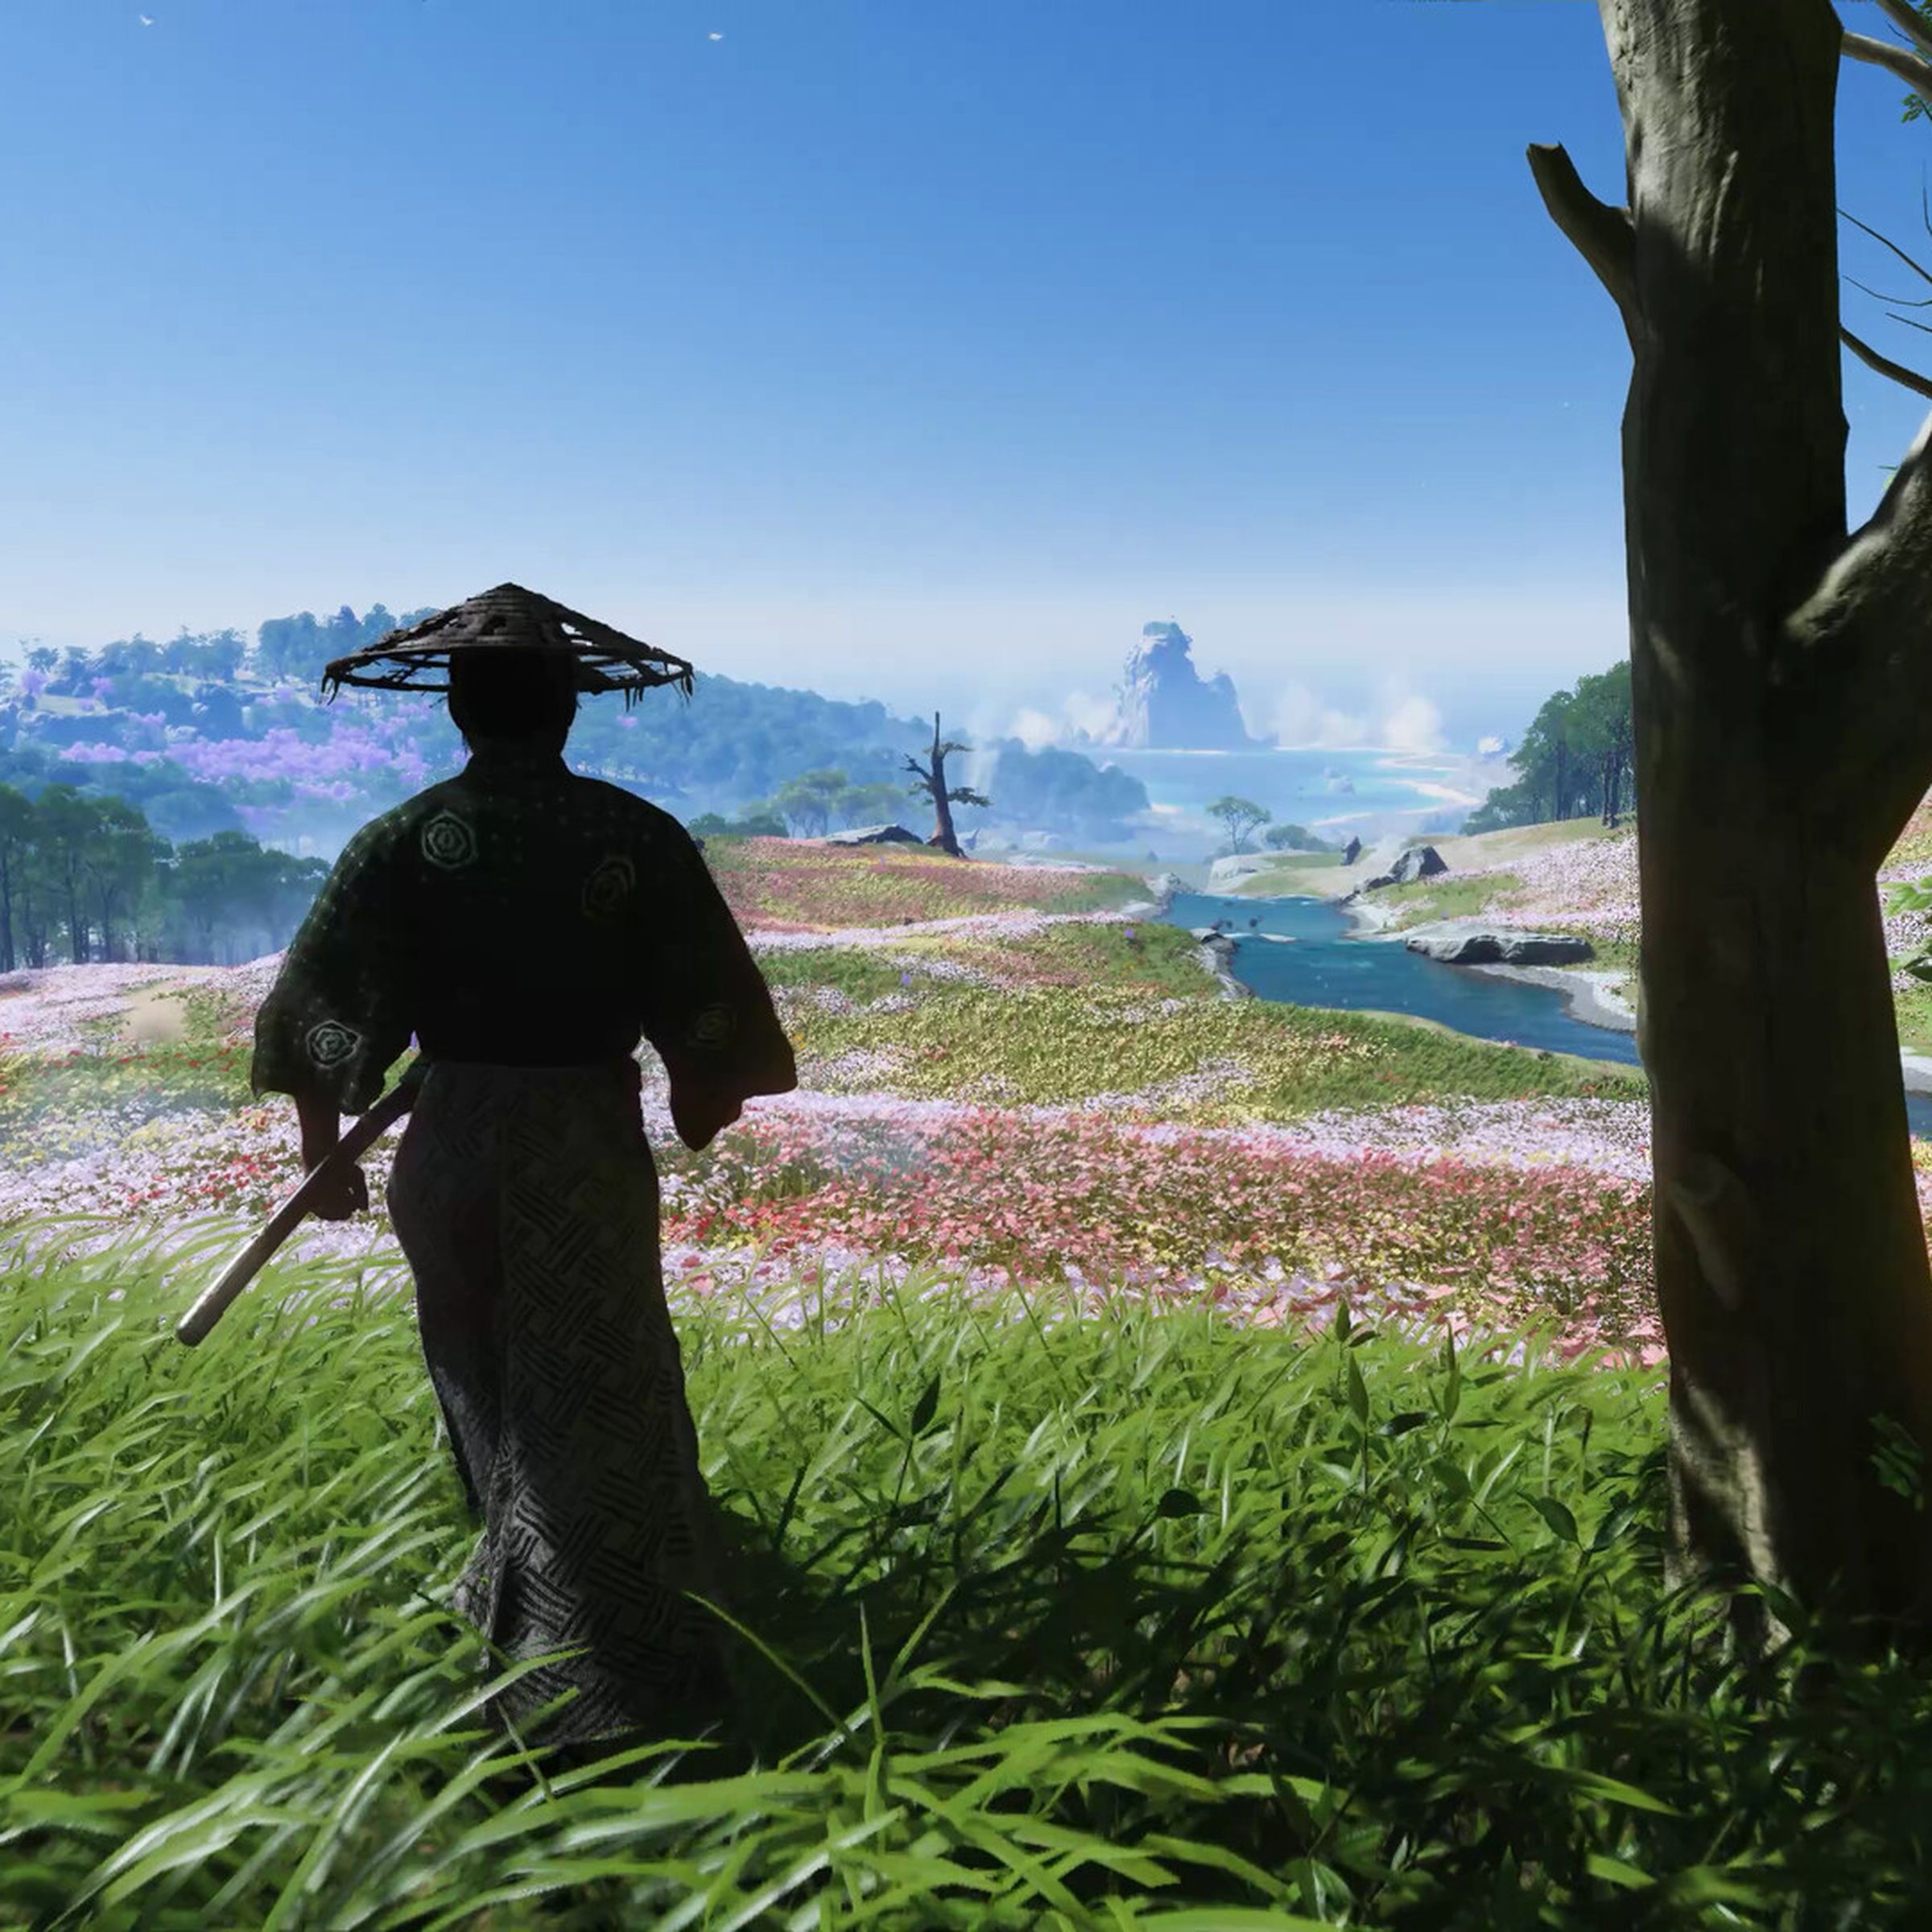 Screenshot from Ghost of Tsushima showing a character overlooking a field, with hills and mountains in the background.